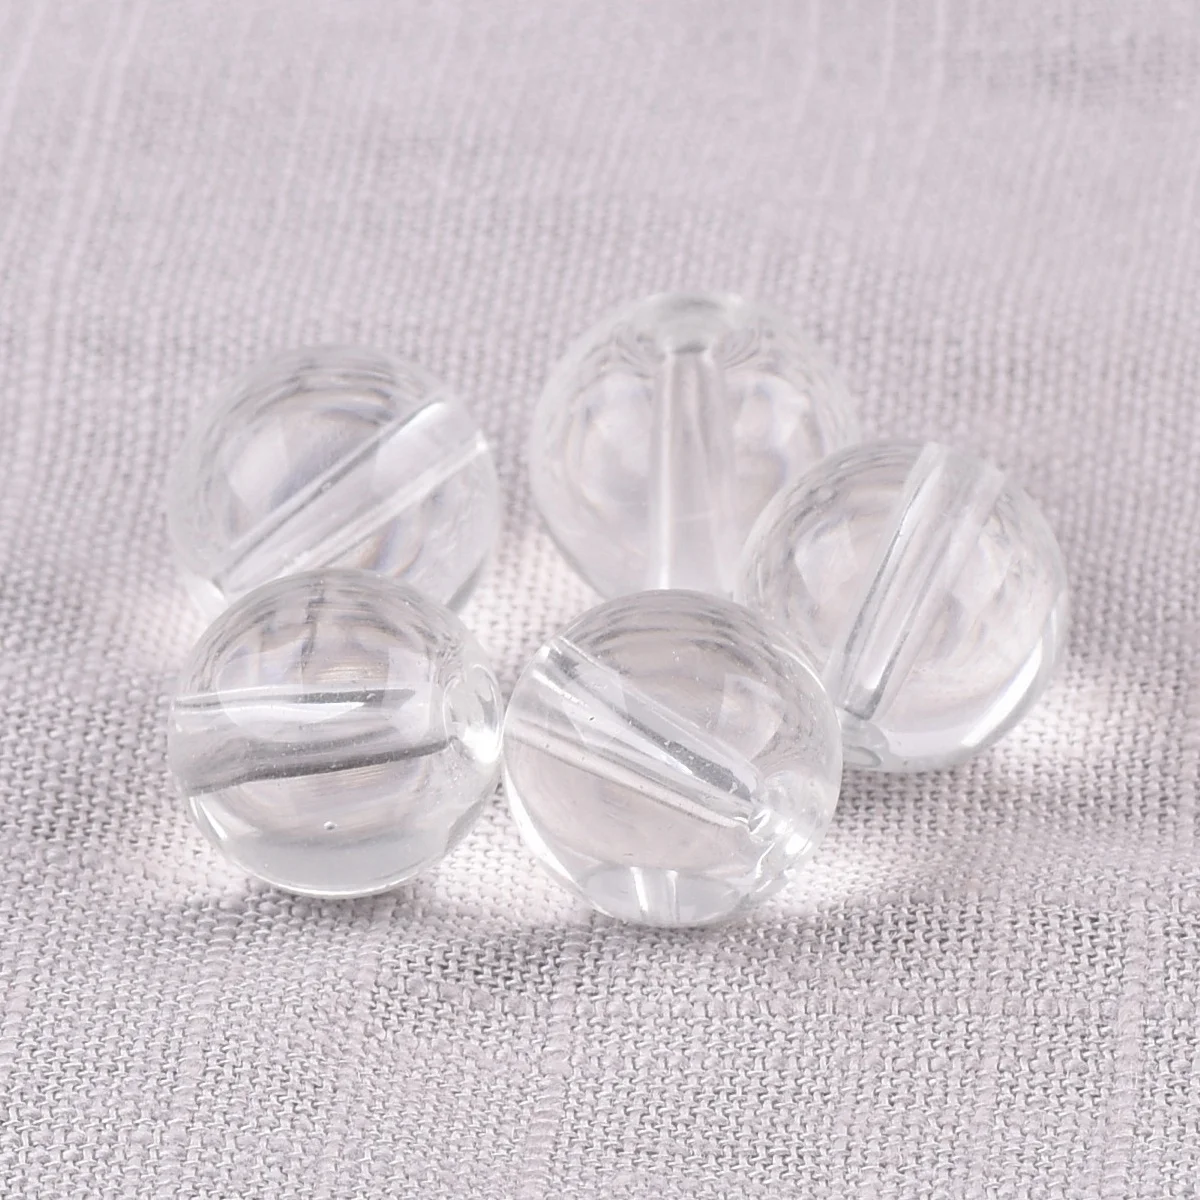 Wholesale ABS Rounded Loose Spacer Beads DIY 6mm 8mm 10mm 12mm 14mm 